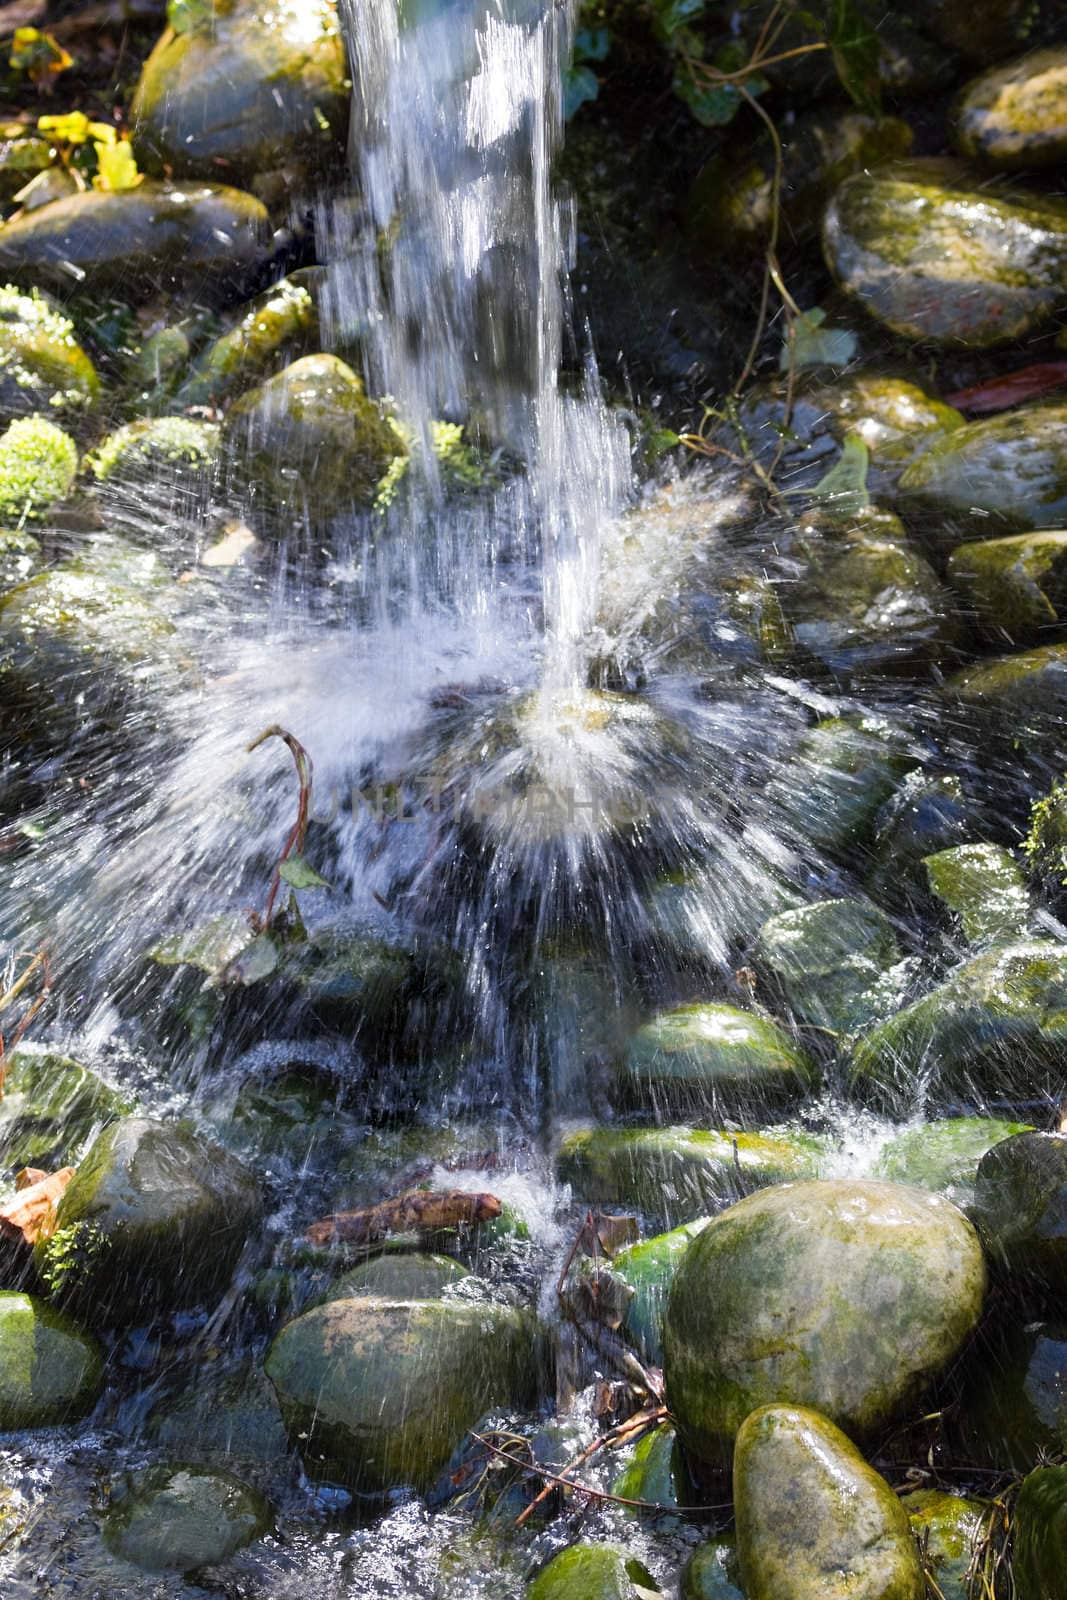 Water is splashing down on boulders from a waterfall